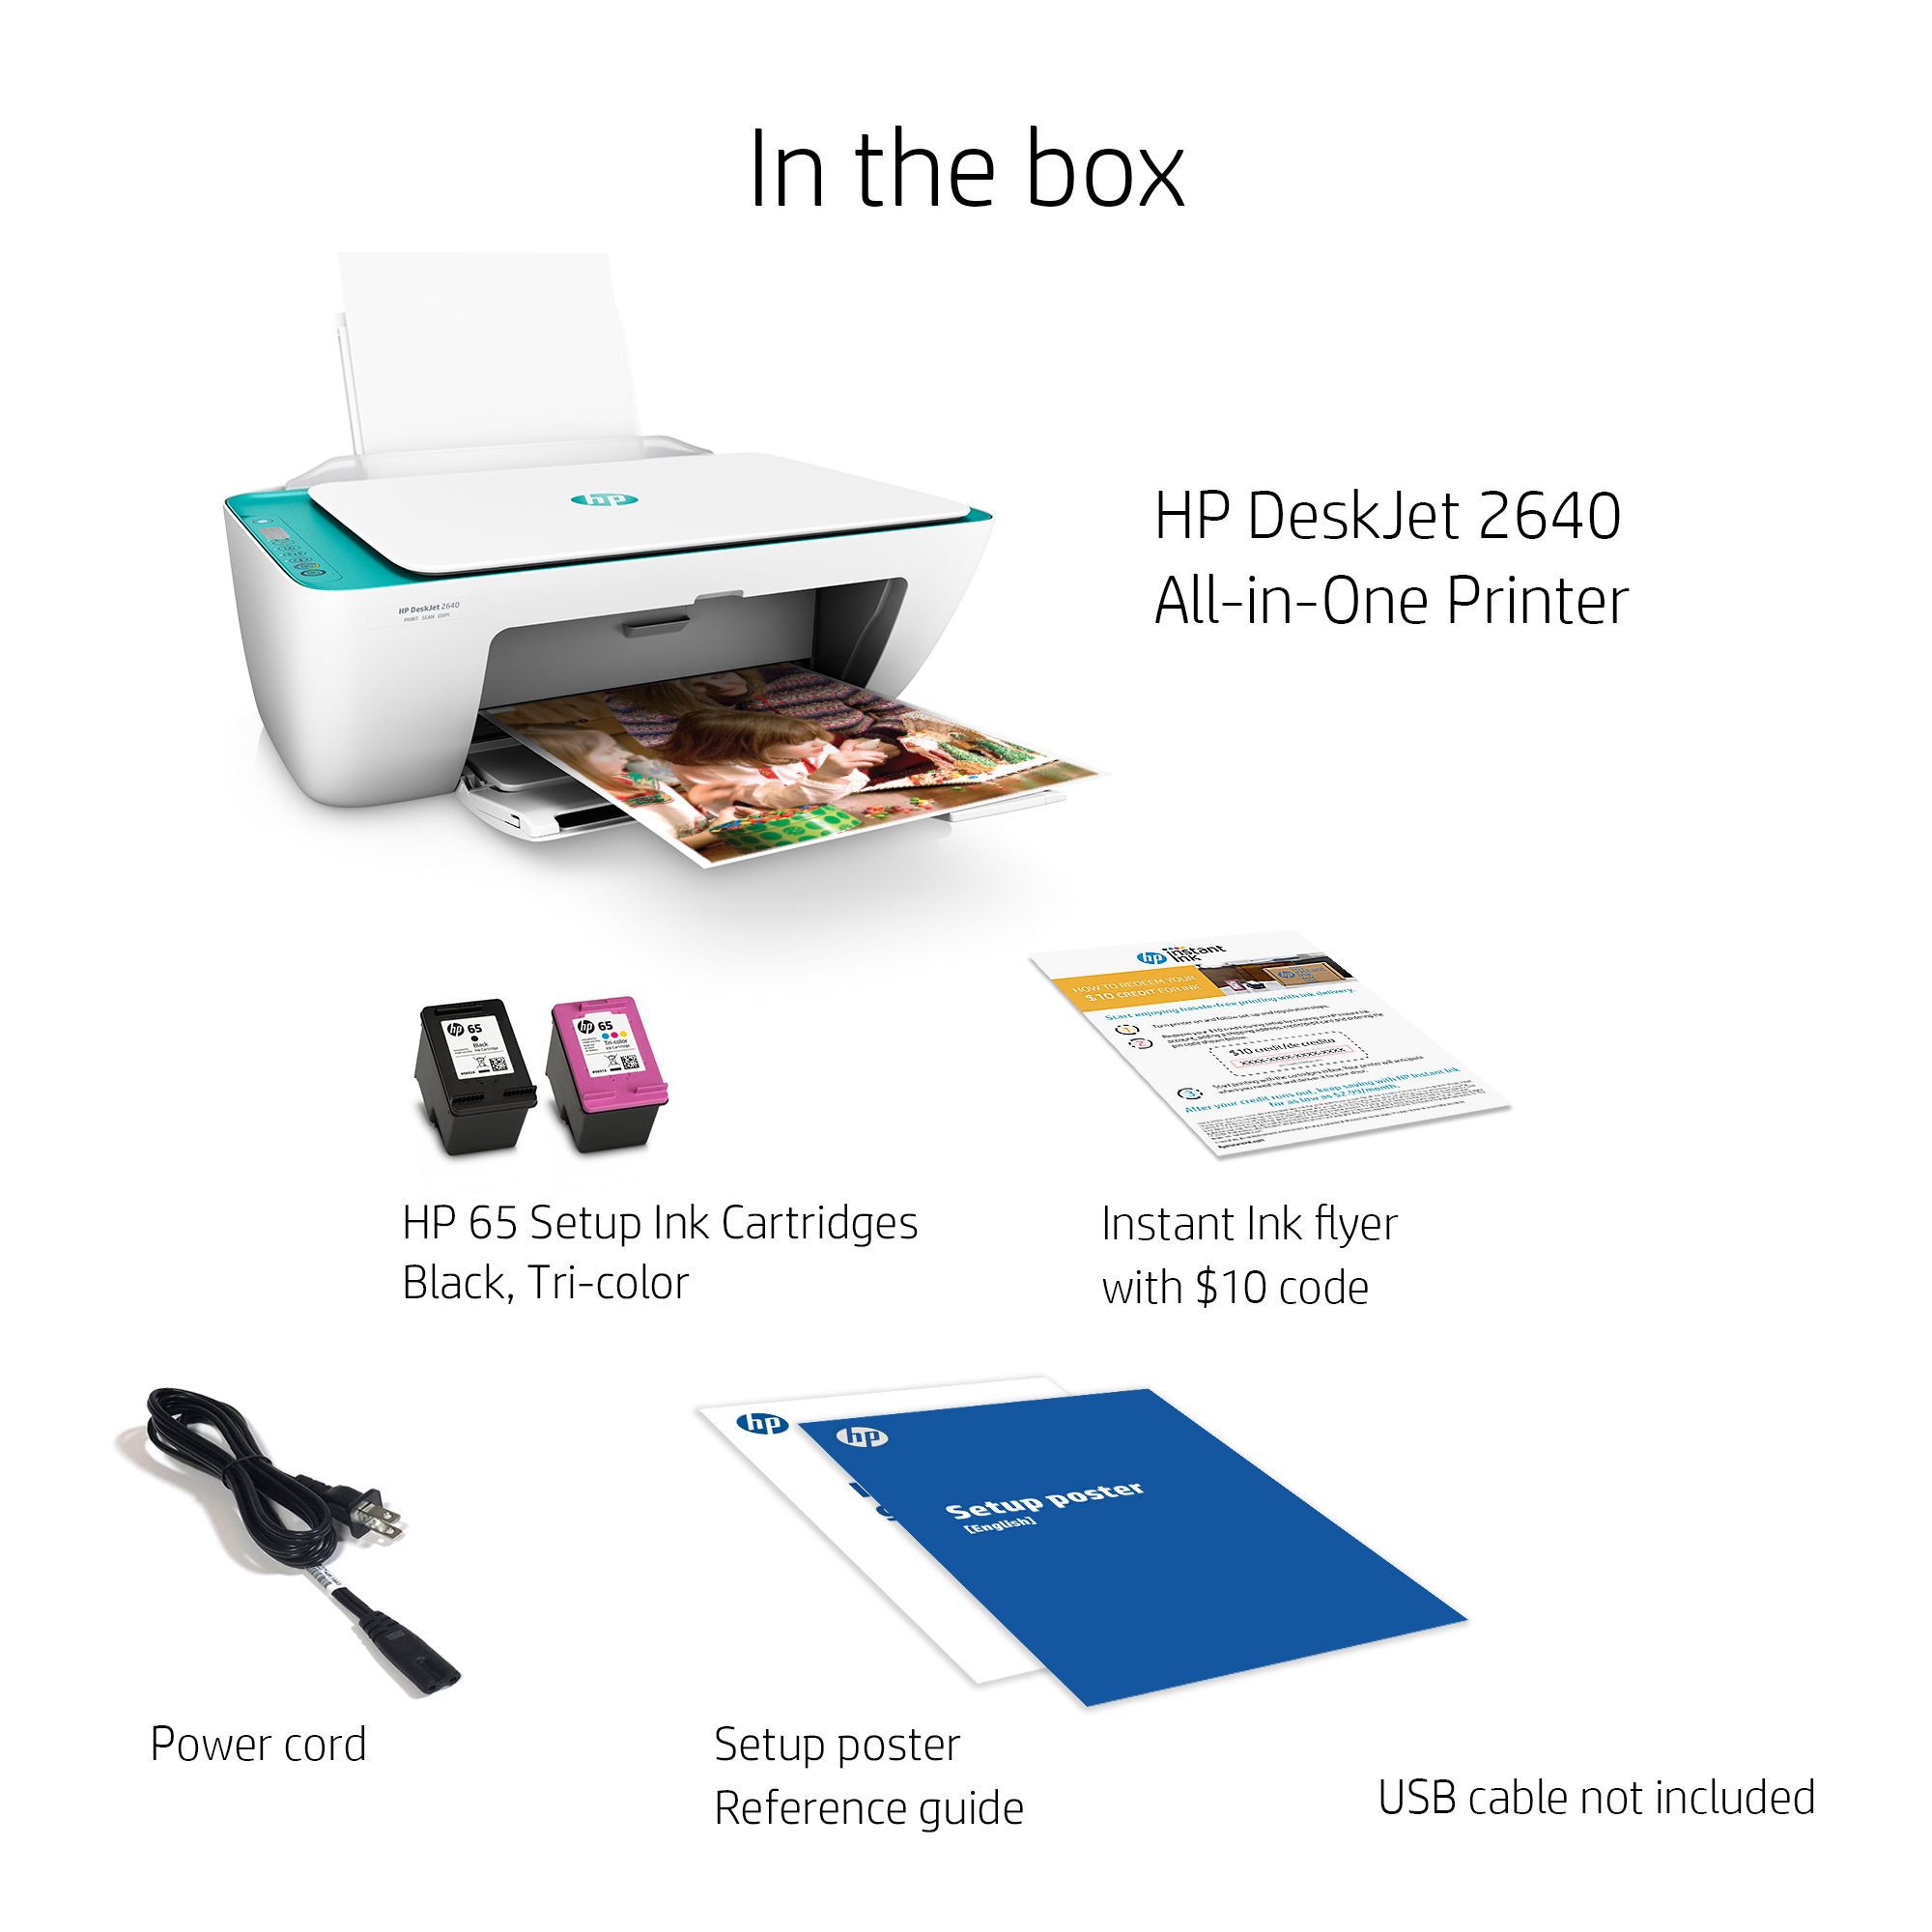 HP DeskJet 2640 All-in-One Wireless Color Inkjet Printer (White/Teal) - Instant Ink Ready - image 3 of 6